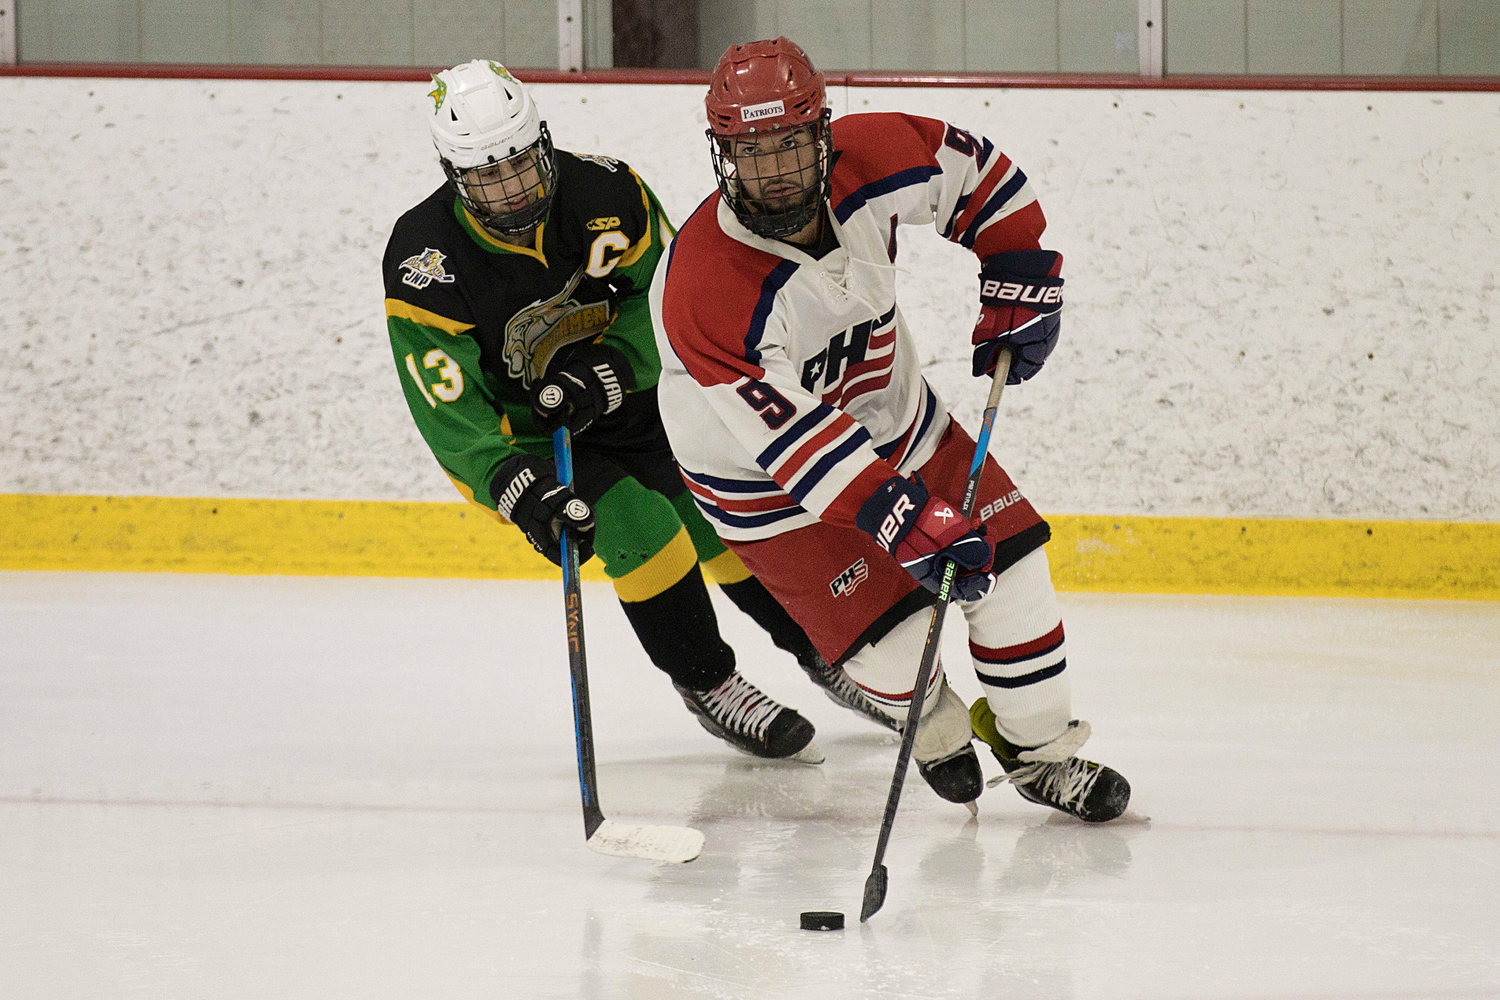 James LeBreux looks toward a teammate while preparing to make a pass.